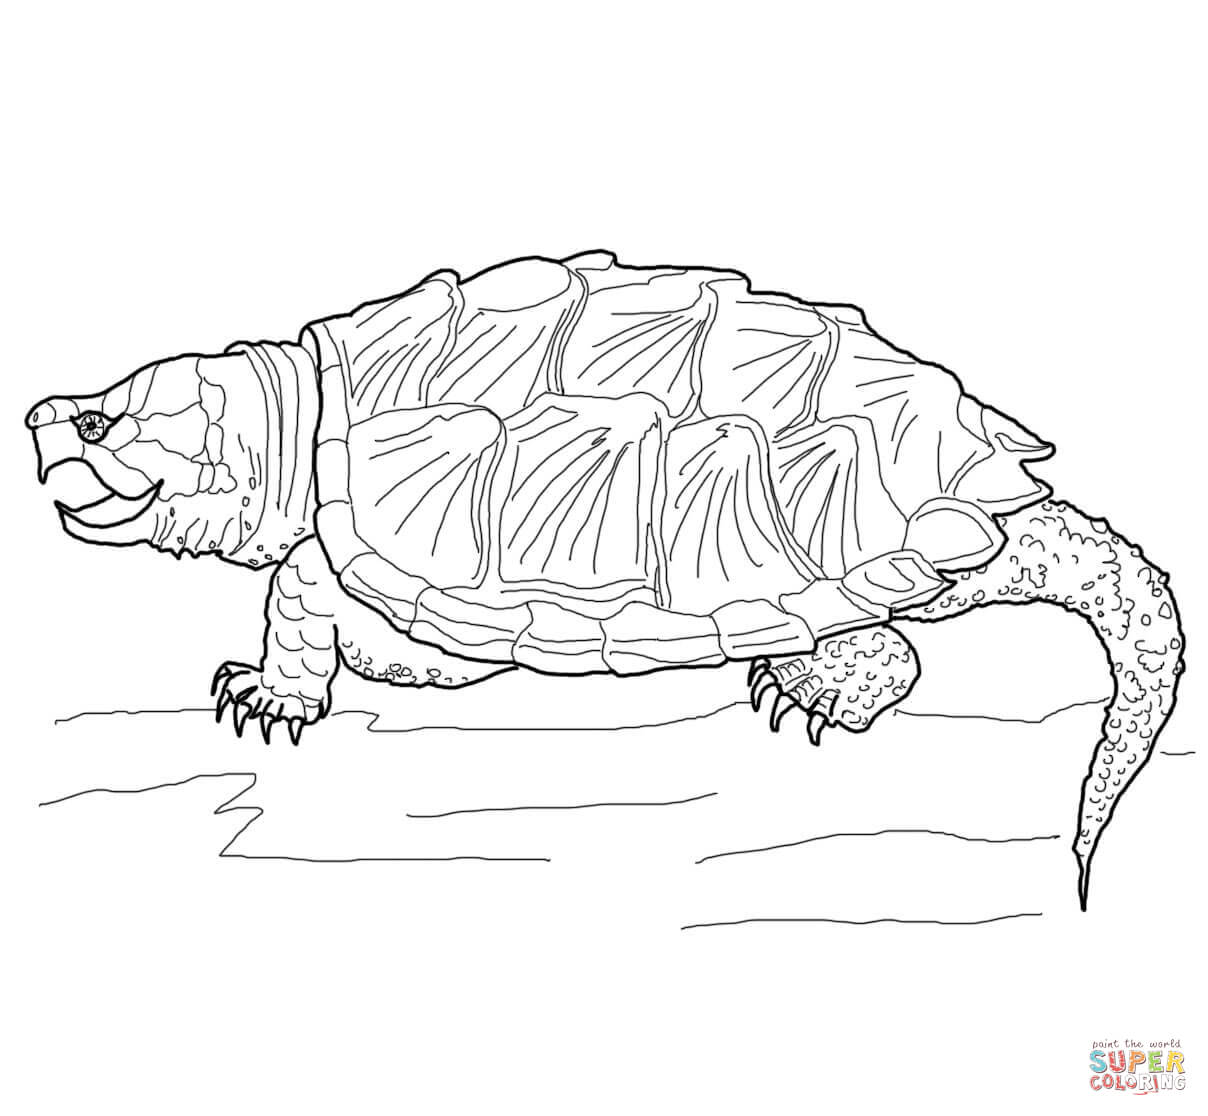 Alligator Snapping Turtle clipart #2, Download drawings